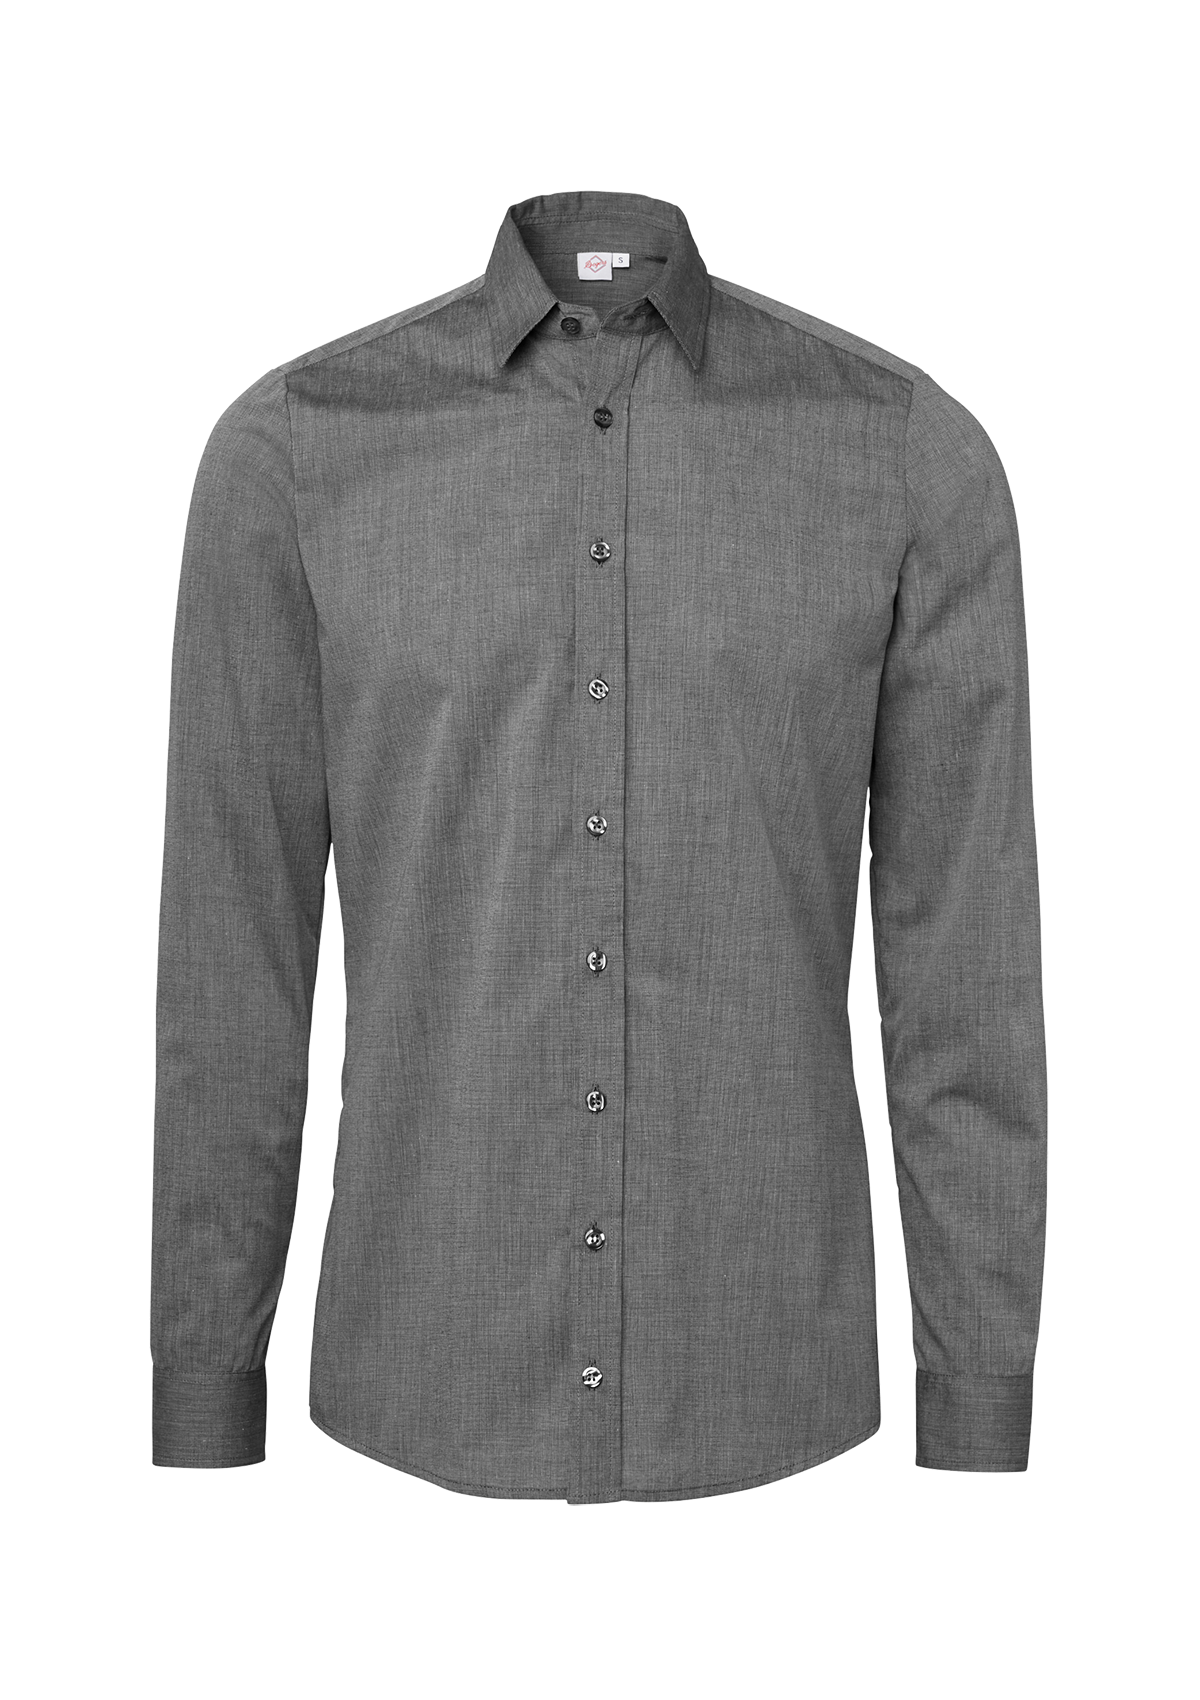 Men's slim-fit shirt with long sleeves. Segers | Cookniche